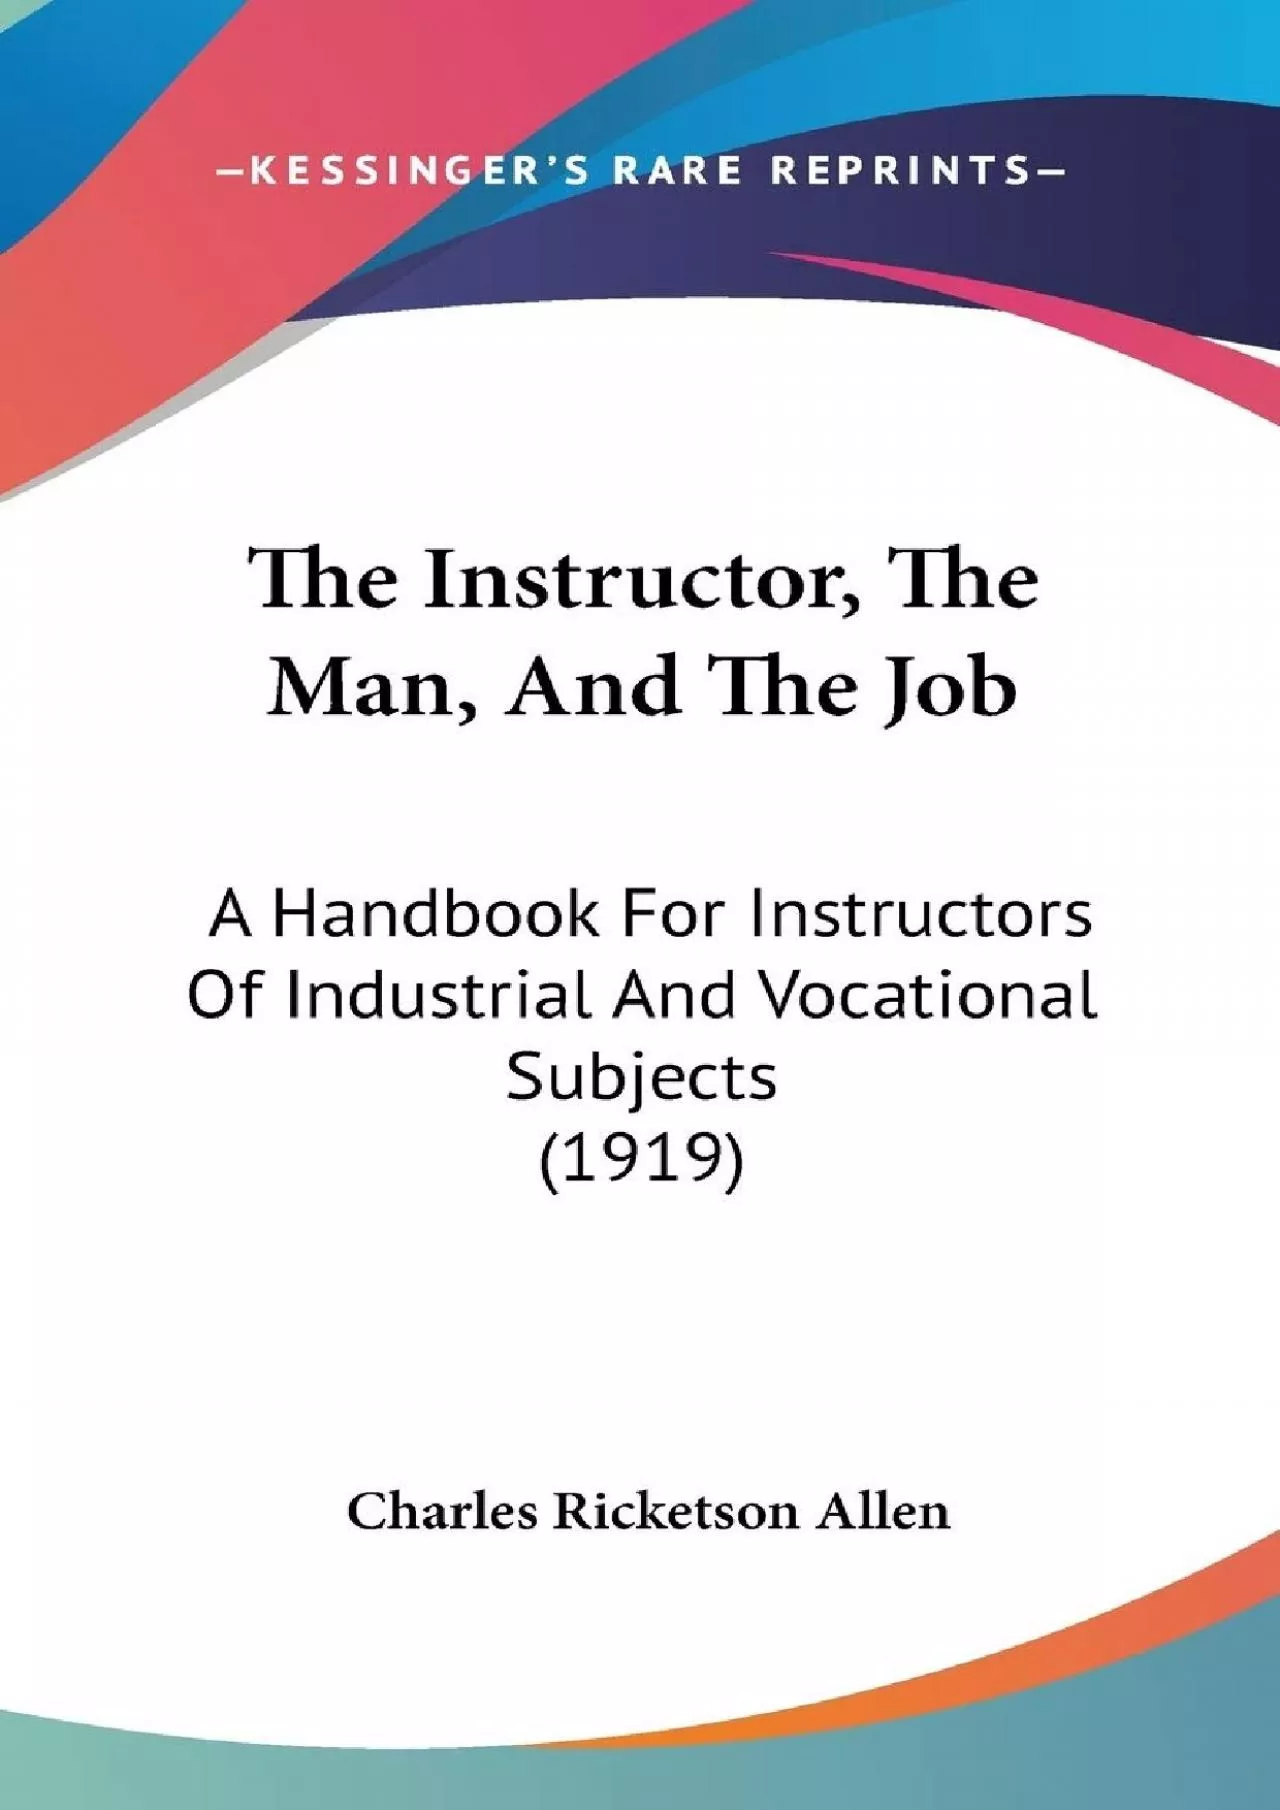 [DOWNLOAD] The Instructor, The Man, And The Job: A Handbook For Instructors Of Industrial